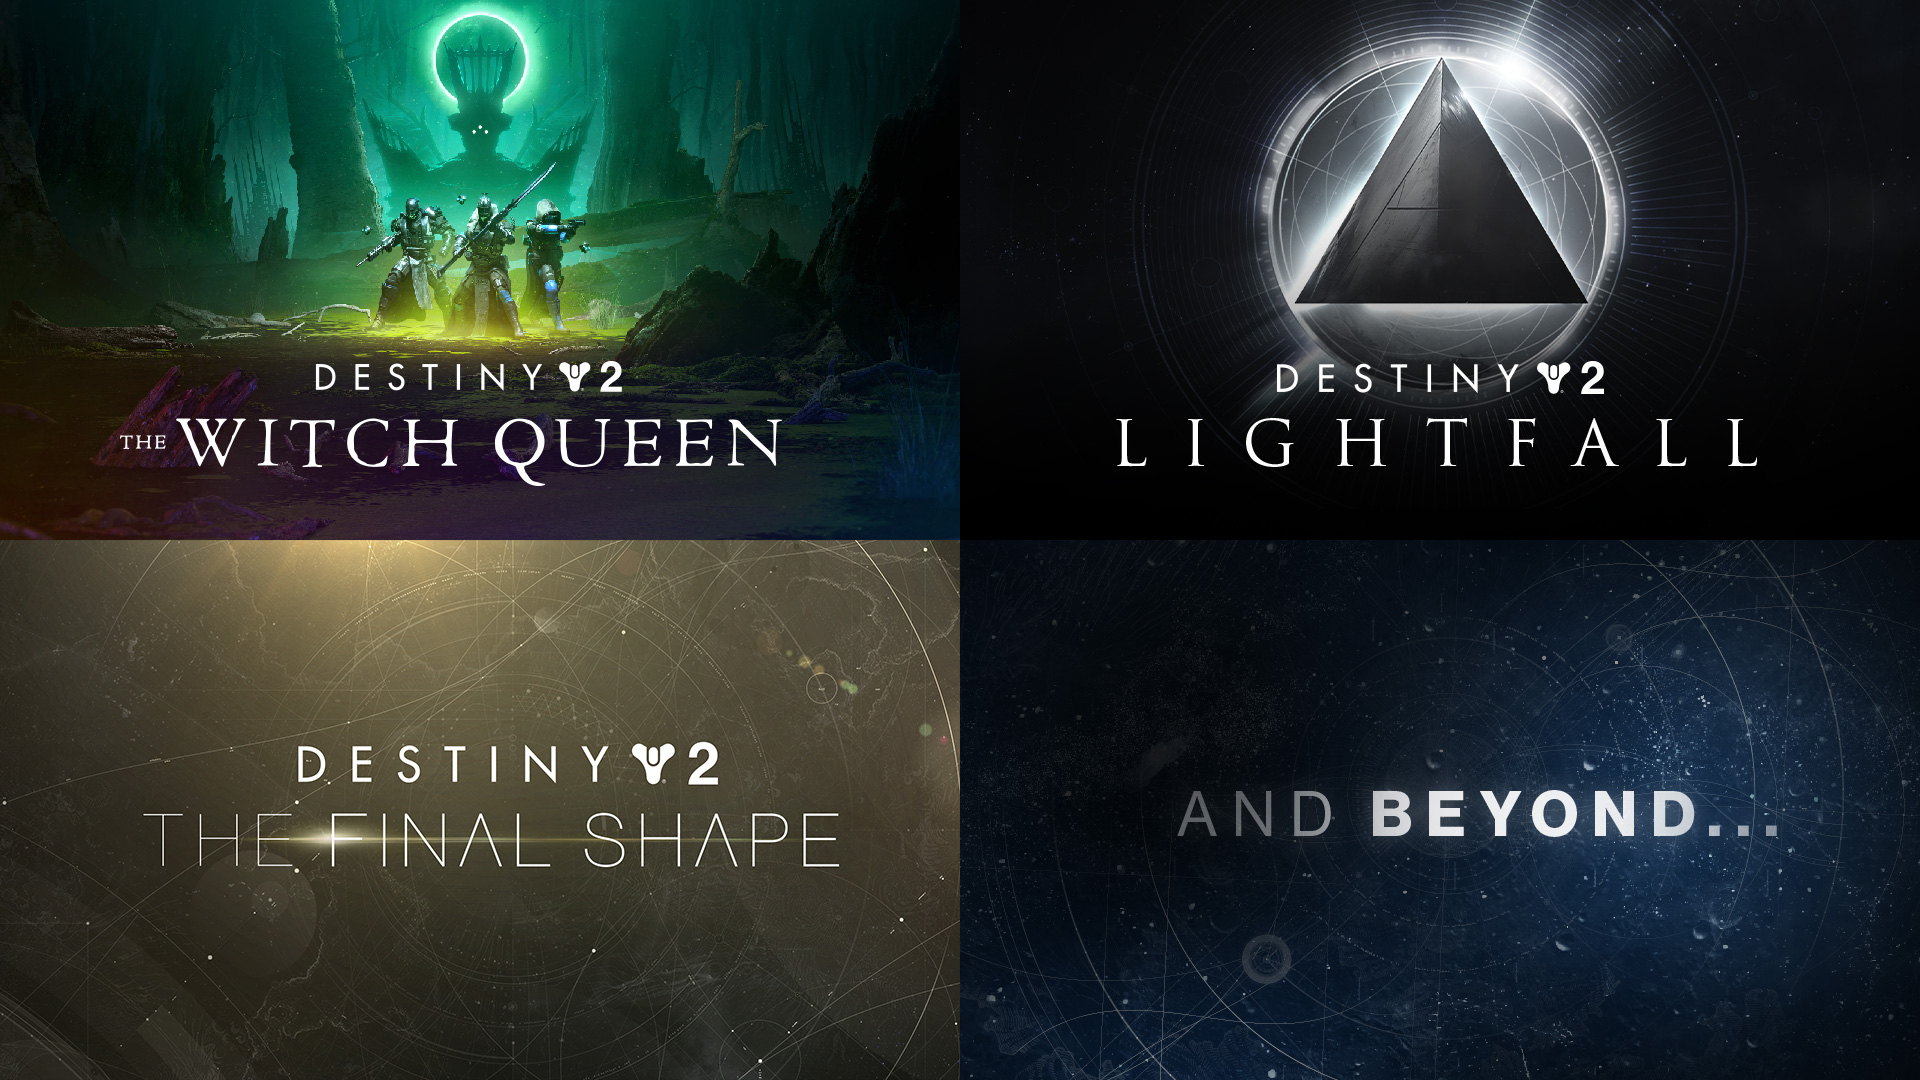 Destiny 2 on "The Light and Darkness will to a dramatic conclusion in Destiny 2: The Final Shape. Make no mistake. 2 will continue beyond. https://t.co/LwA14MIq0e" / Twitter